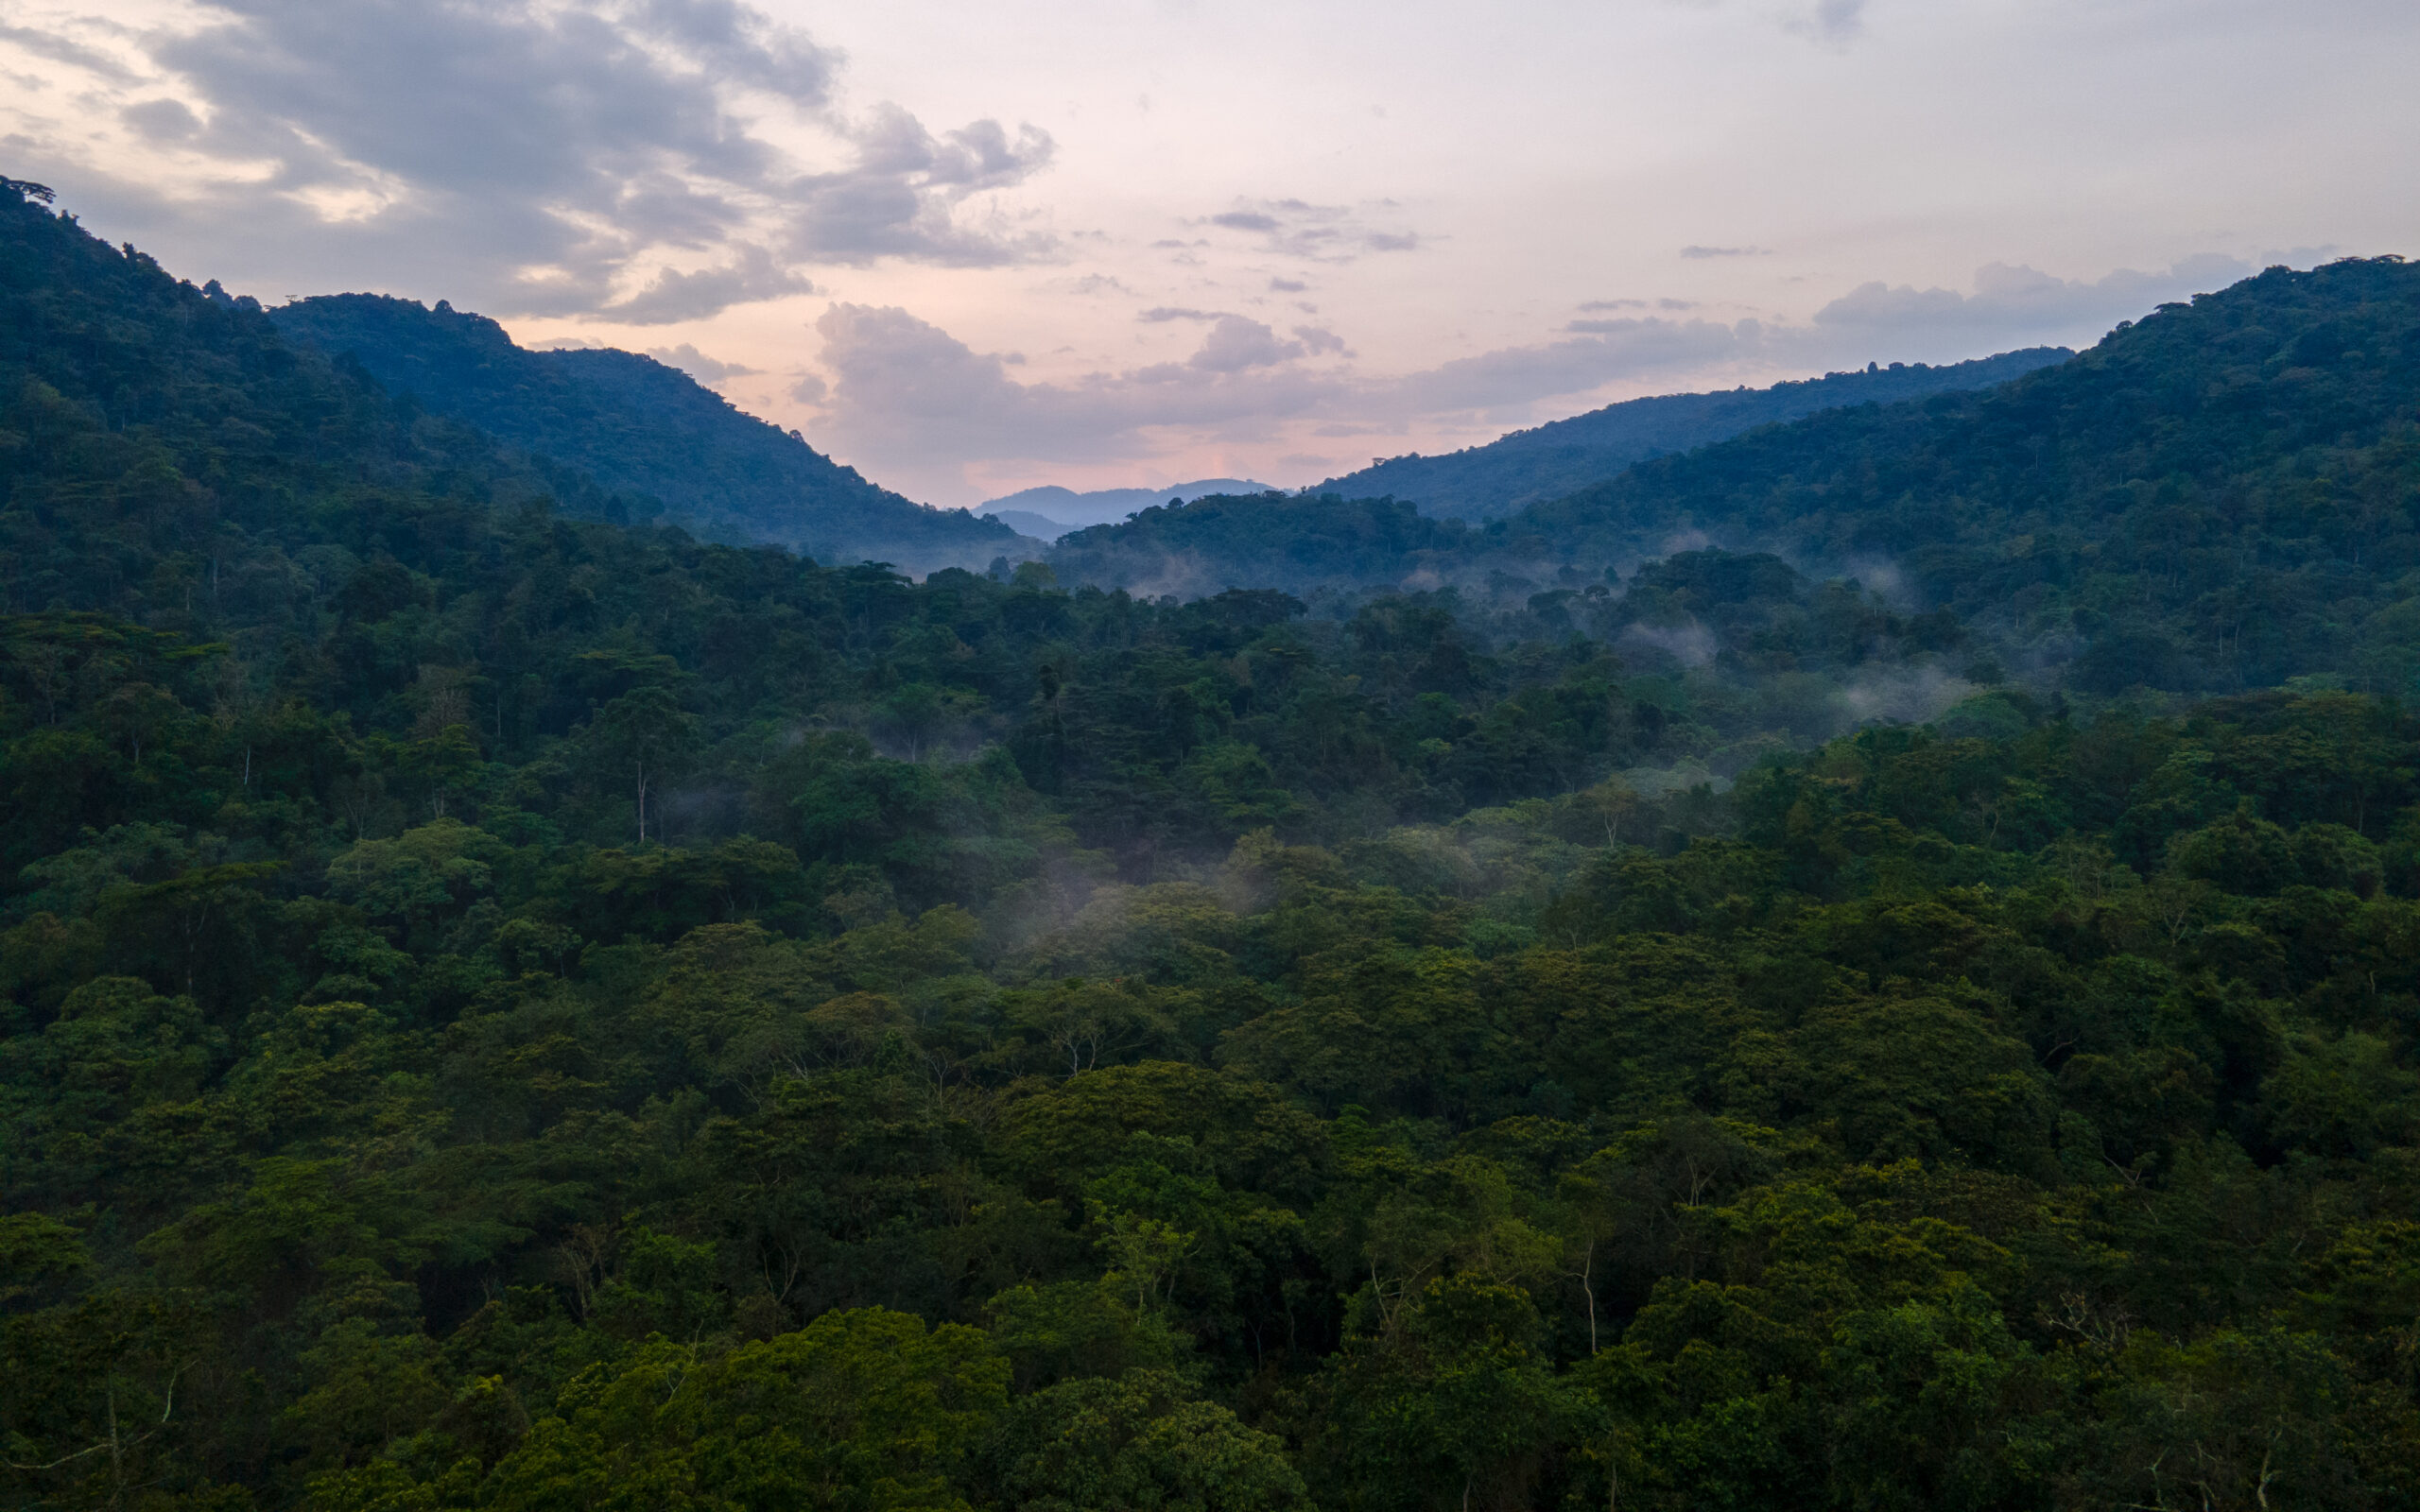 A photograph of the forest view of Bwindi Impenetrable Forest captured in Bwindi Impenetrable National Park in South-Western Uganda.